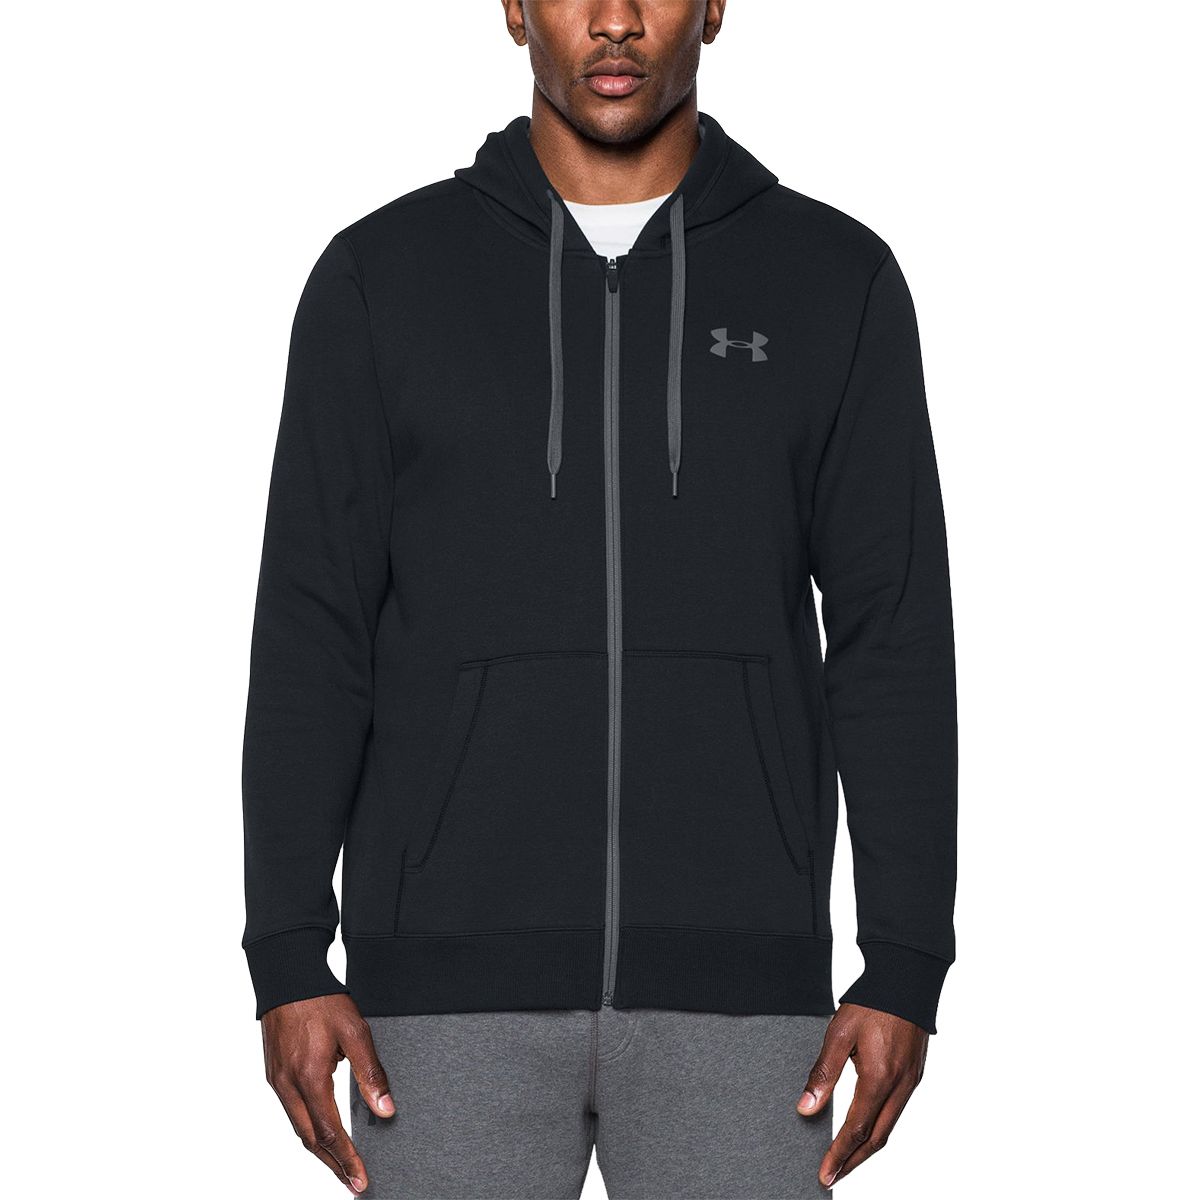 Under Armour Rival Cotton Full-Zip Hoodie - Men's - Clothing